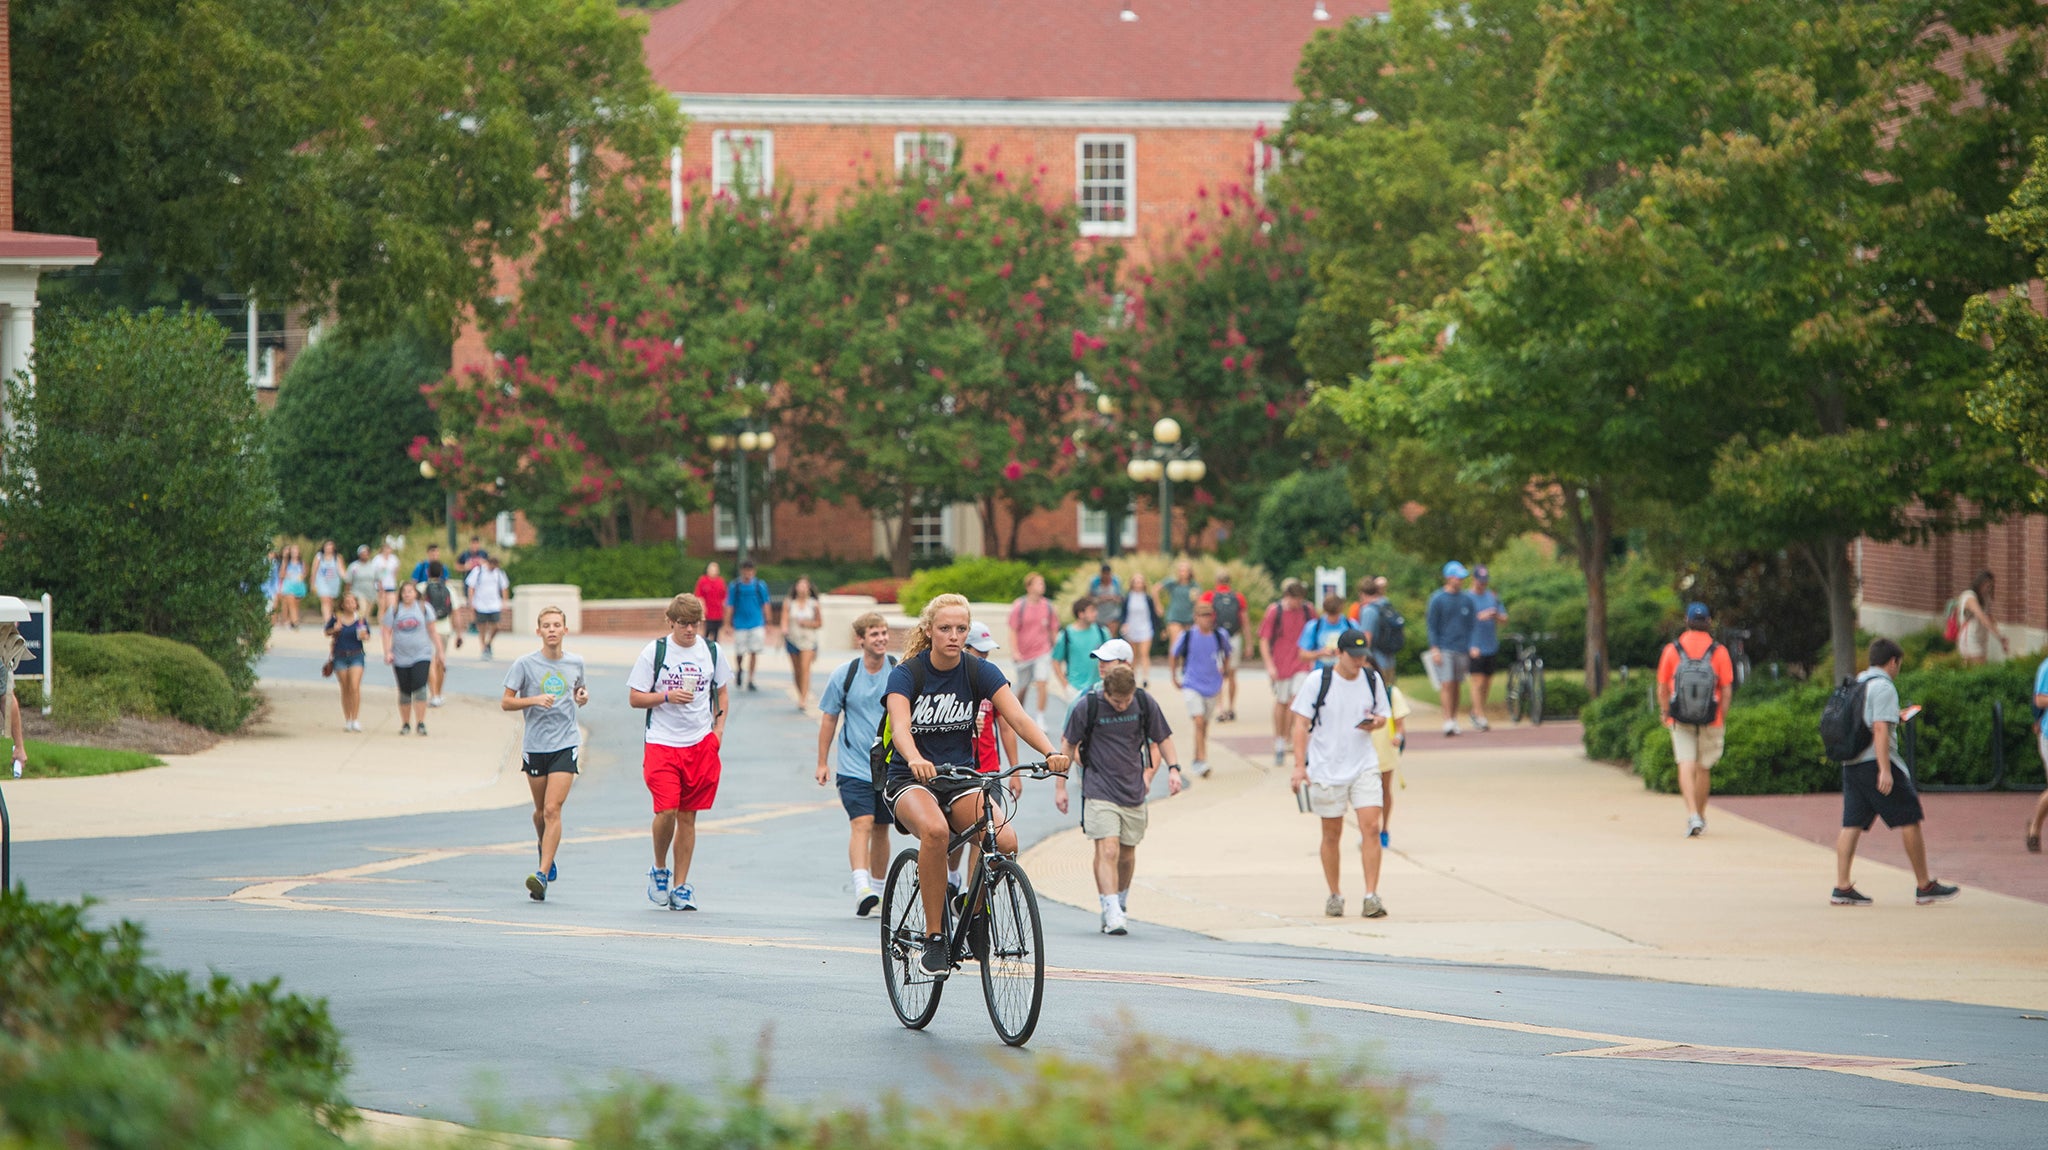 The University of Mississippi has defied national enrollment trends, experiencing significant growth in total enrollment and improved retention rates